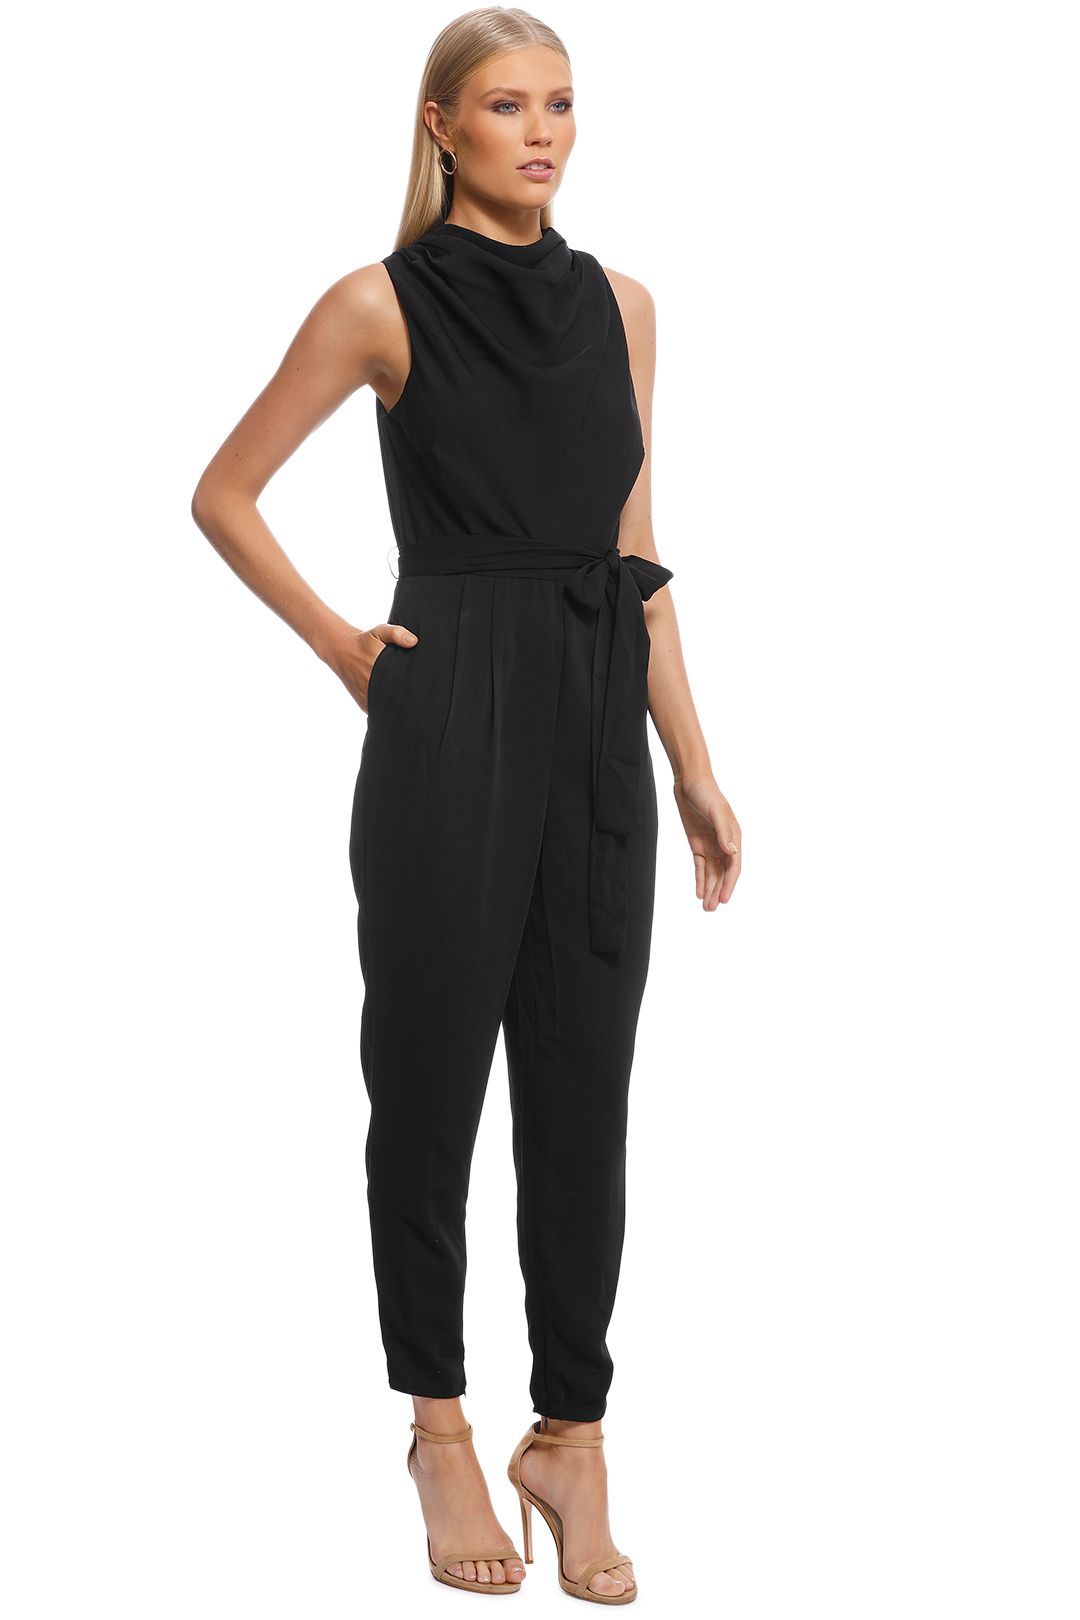 Allure Jumpsuit in Black by Keepsake the Label for Rent